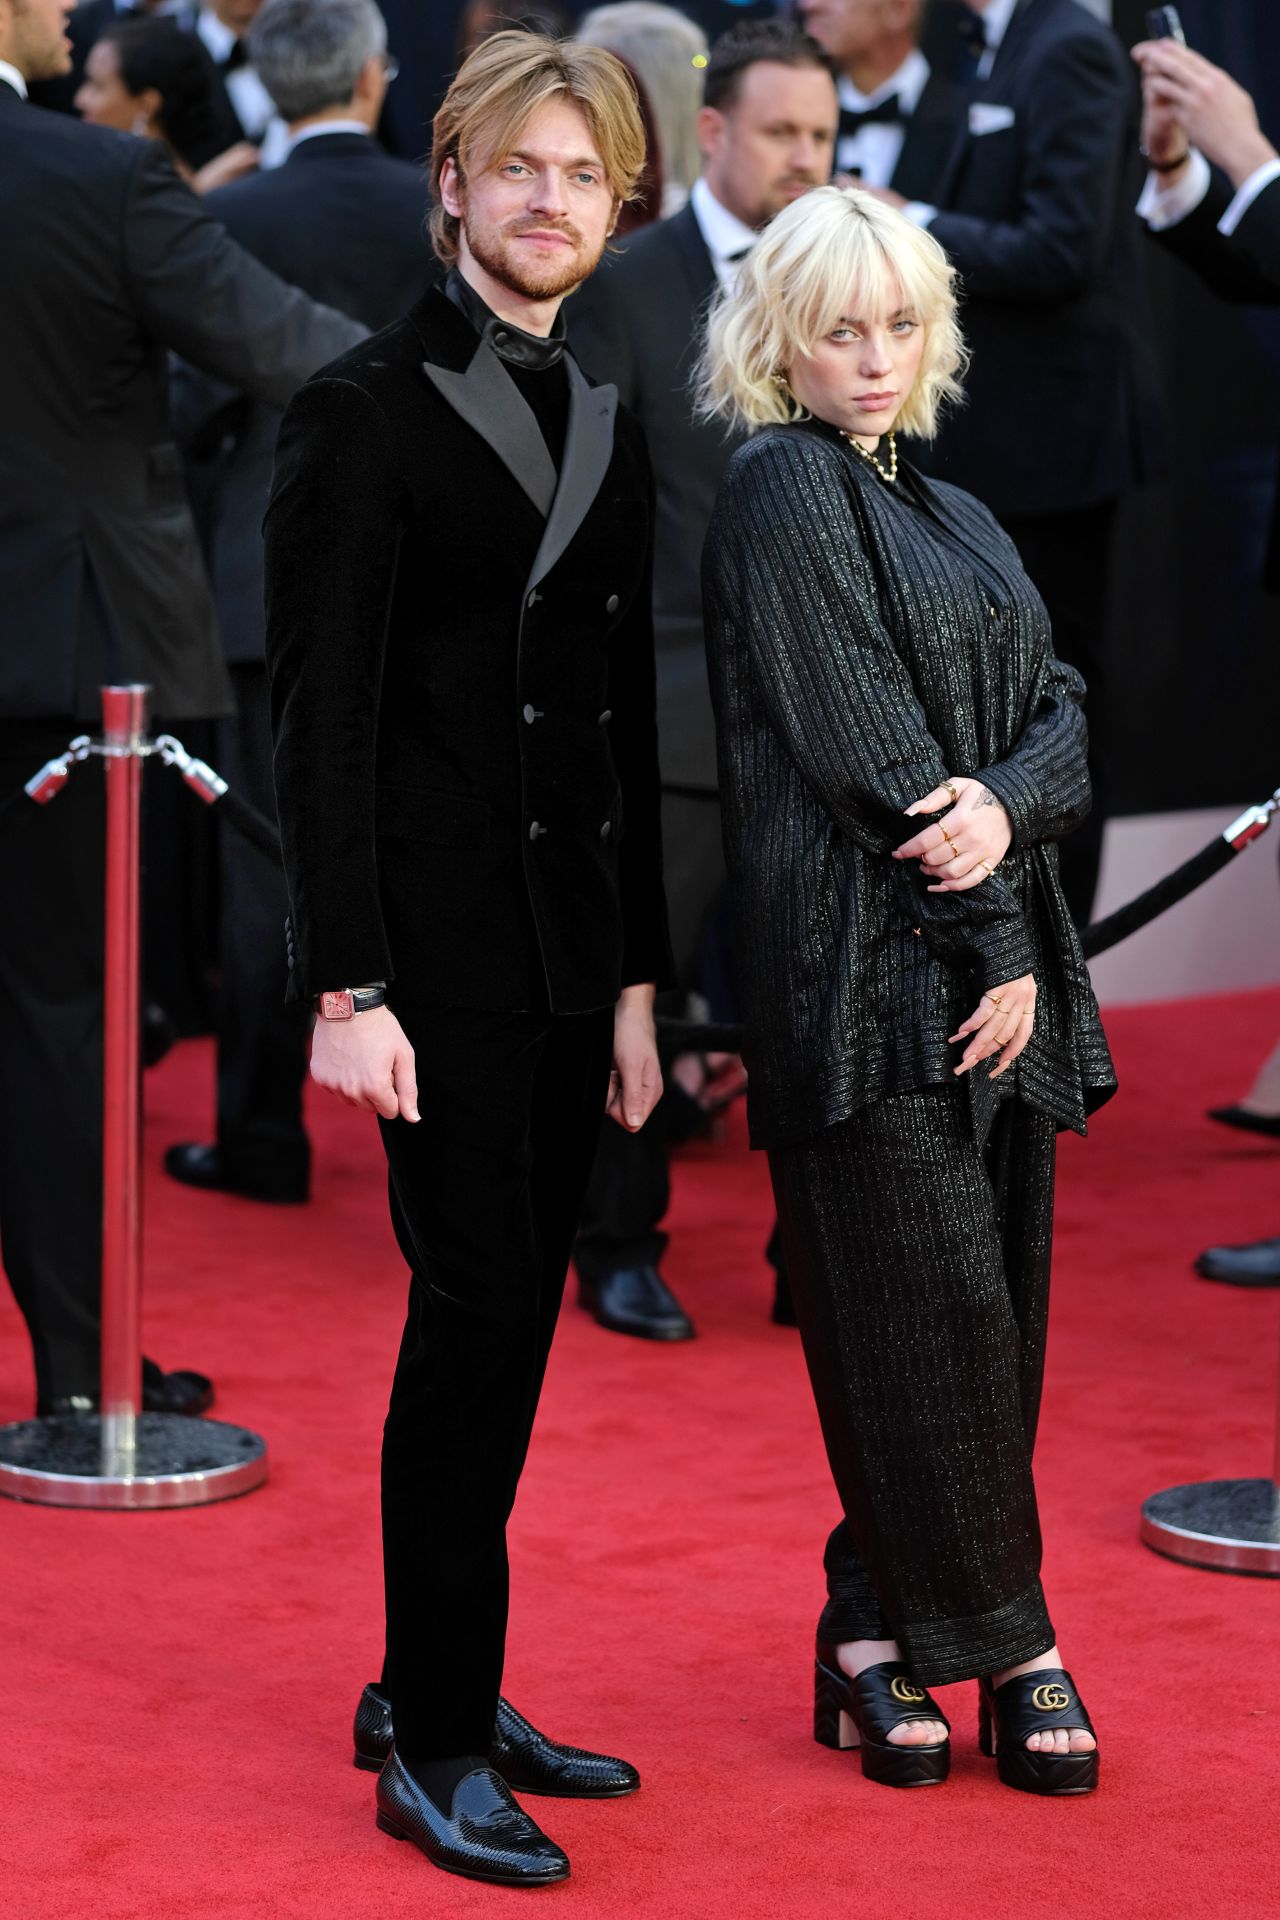 Siblings Finneas O'Connell and Billie Eilish, who co-wrote the movie's theme tune, attended the premiere. 